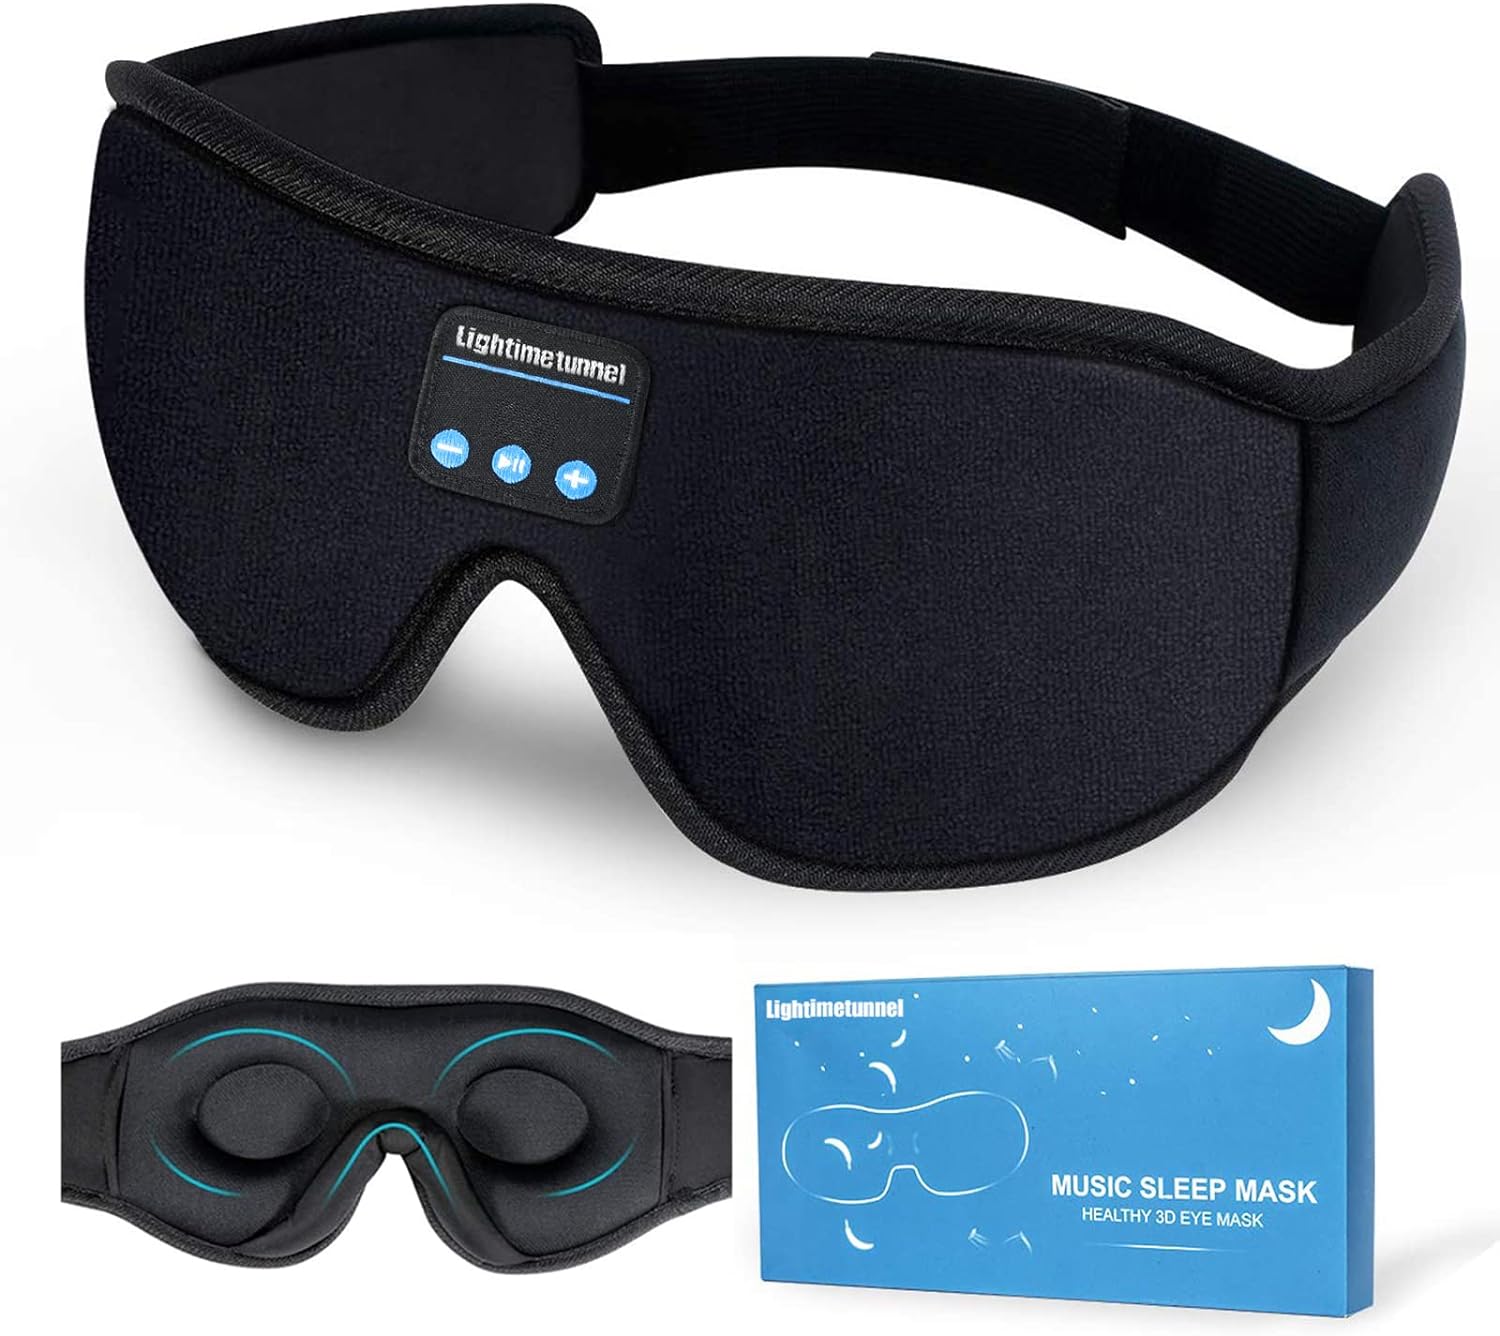 3D Eye Mask with Stereo Speaker - Adjustable Ultra Thin Stereo Speakers - Light Weight